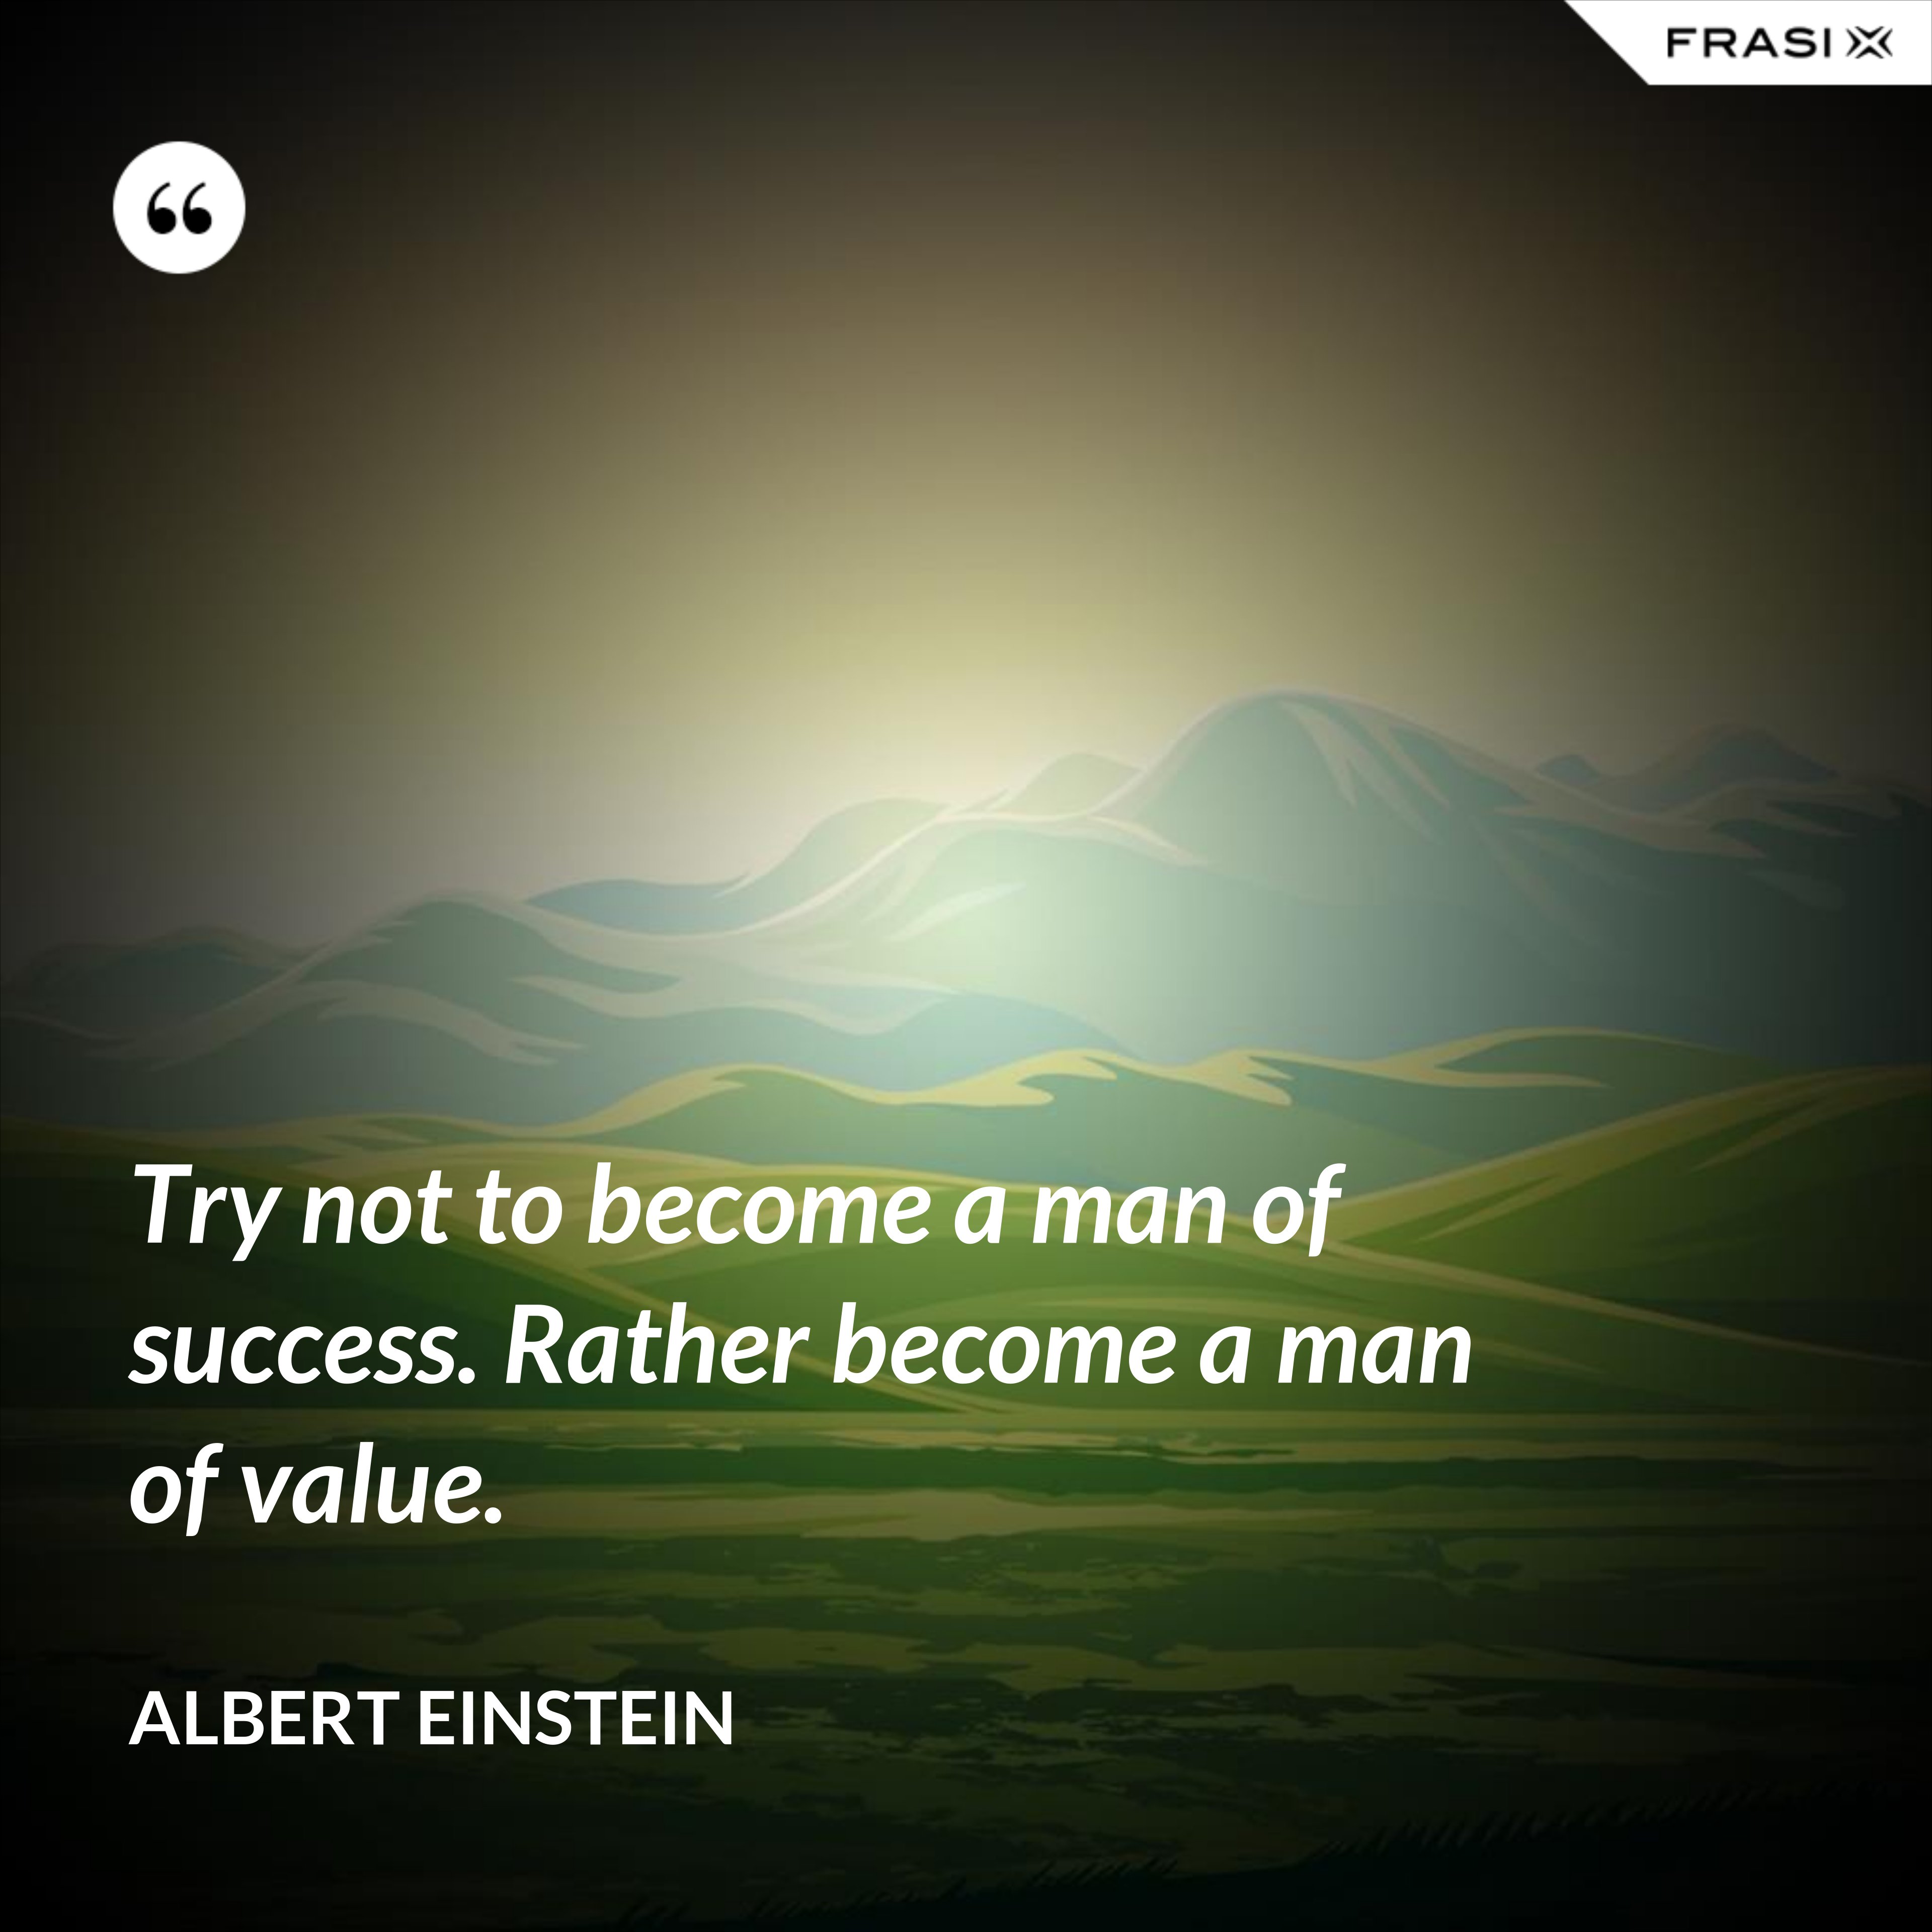 Try not to become a man of success. Rather become a man of value. - Albert Einstein